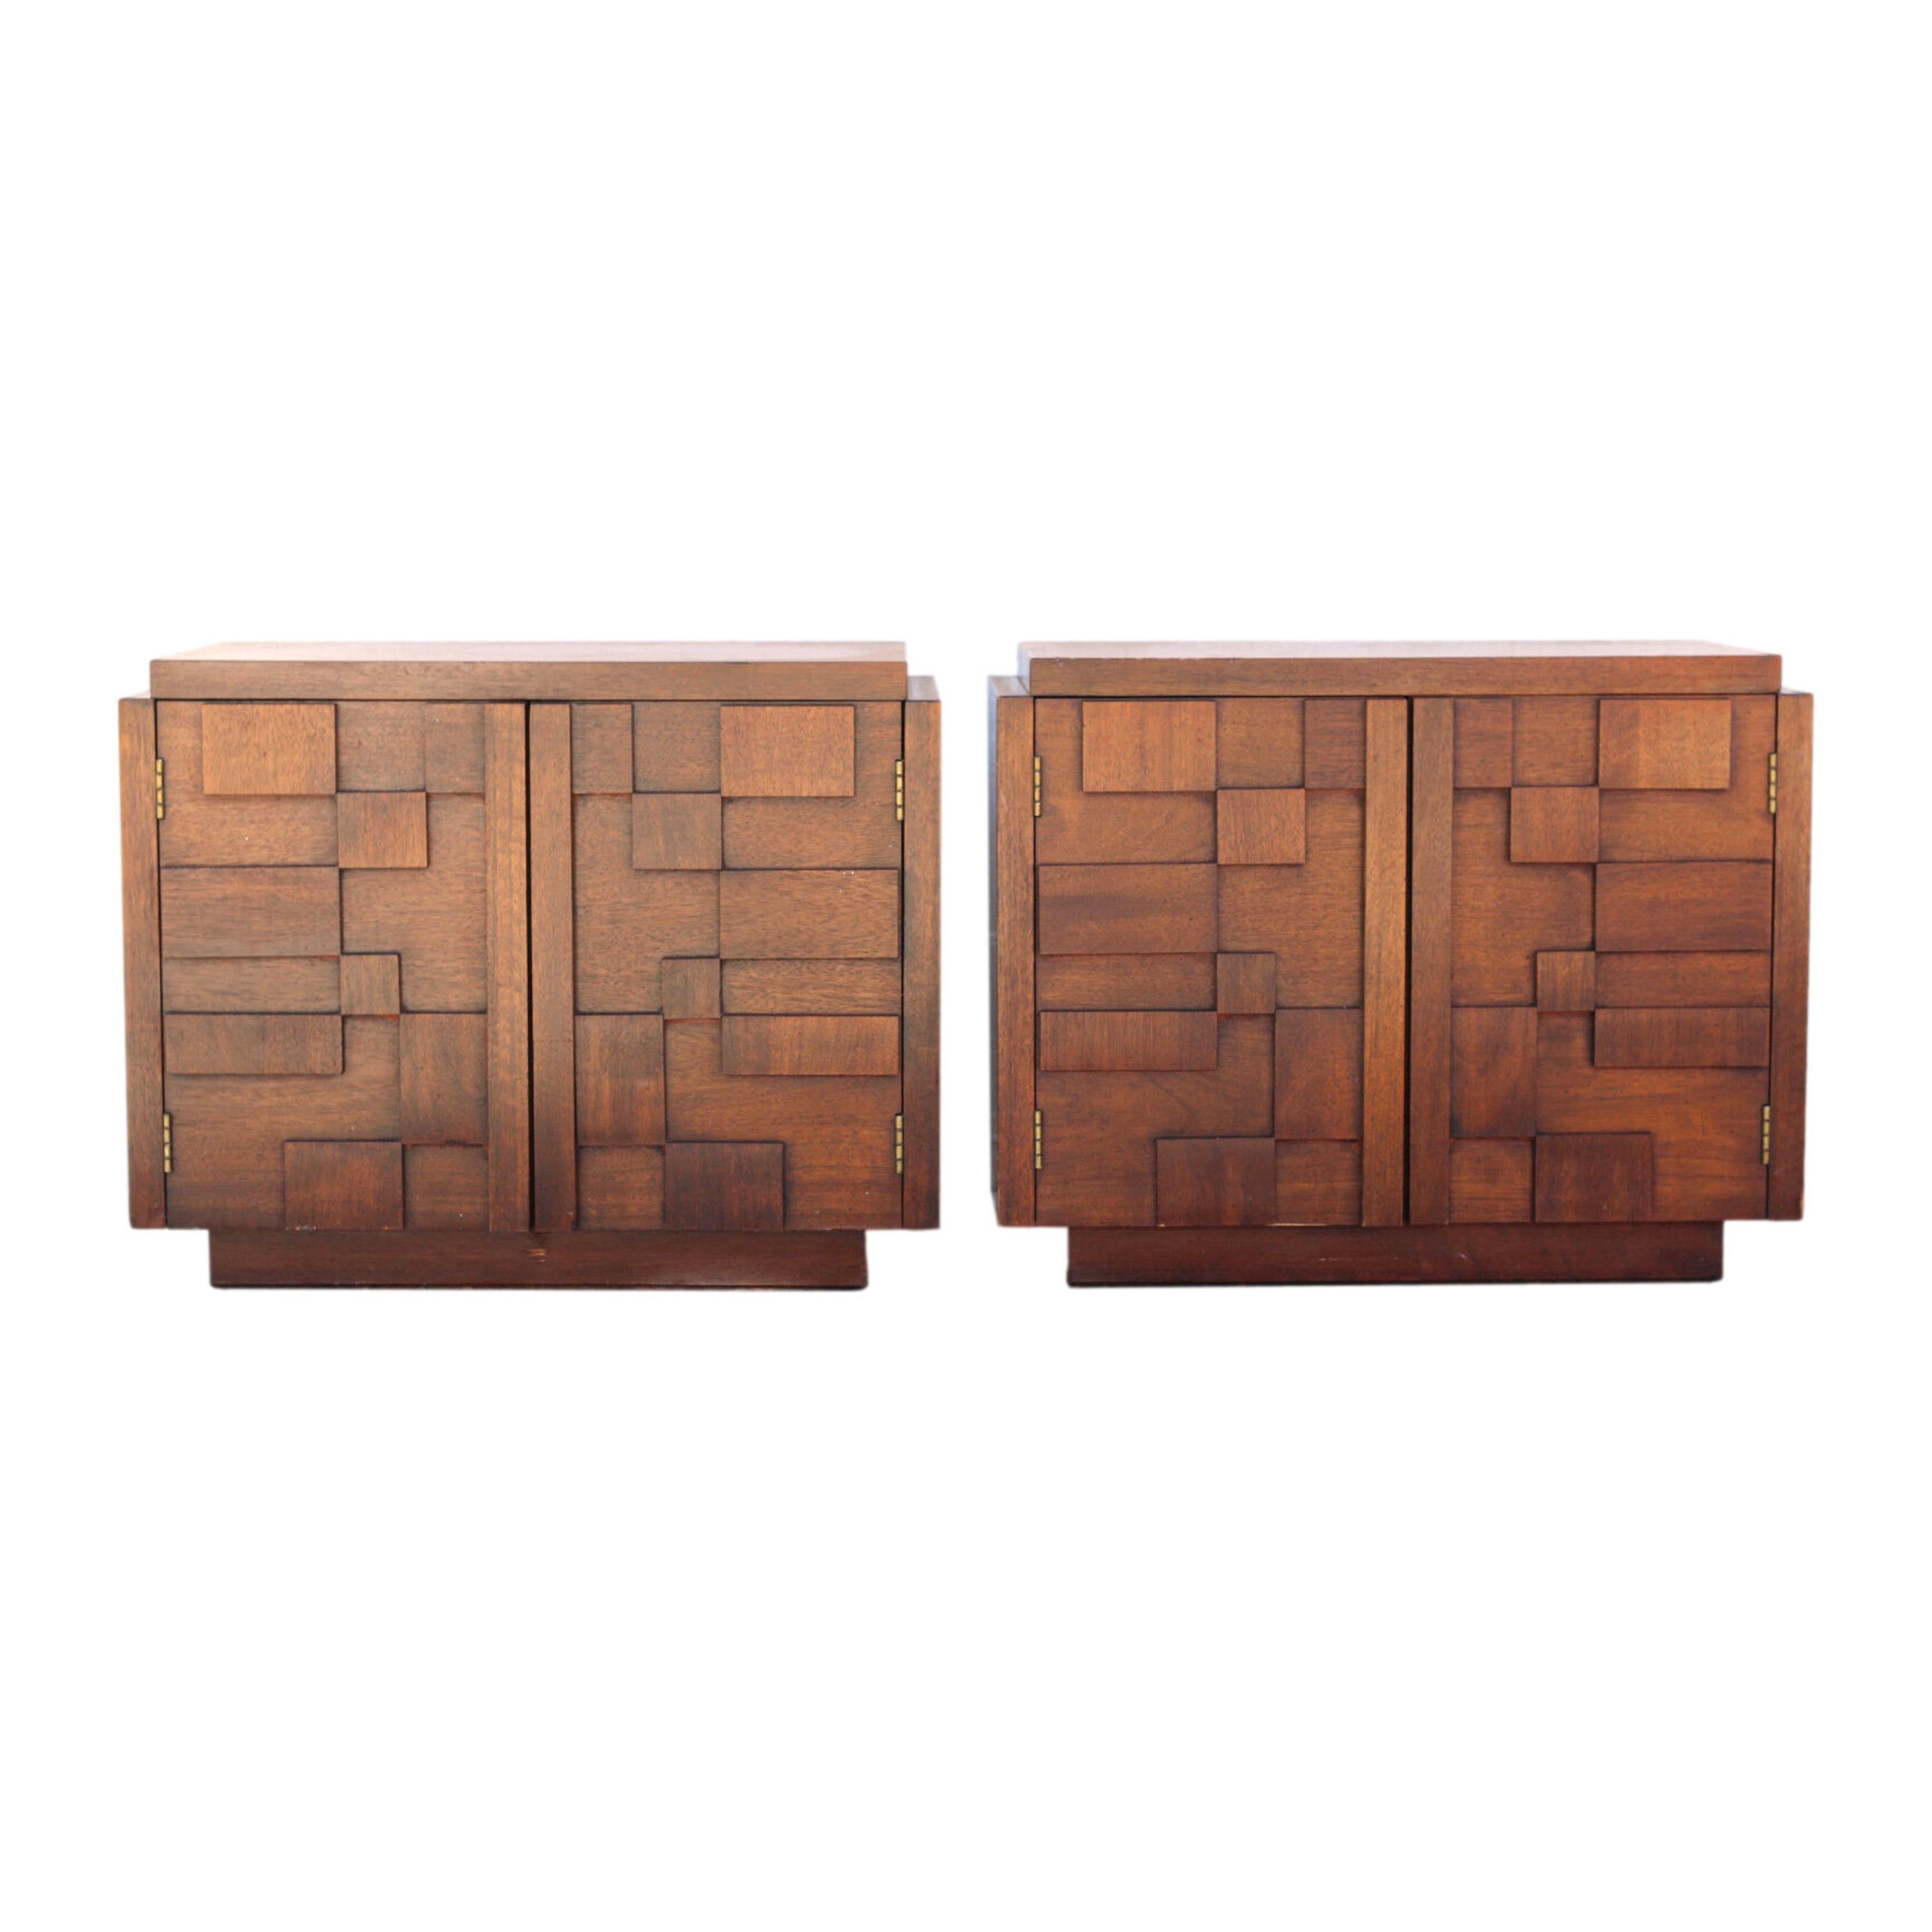 Paul Evans inspired brutalist mosaic nightstands by lane, a pair.

Stunning vintage mosaic nightstands by Lane, in the Brutalist style, made famous by the legendary American designer and sculptor Paul Evans. Two doors open to reveal a fixed shelf